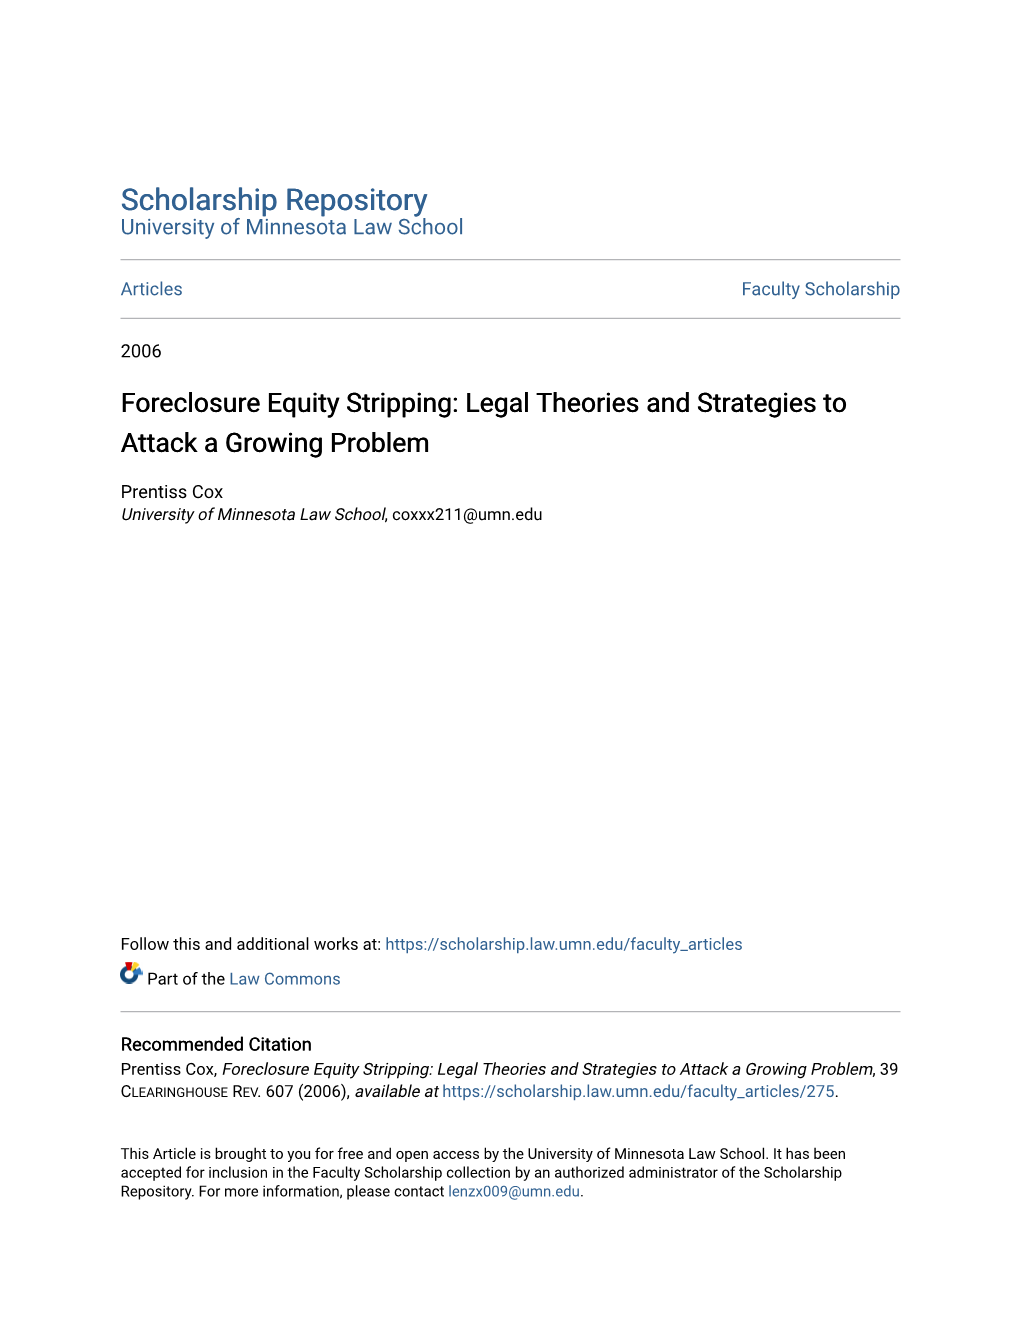 Foreclosure Equity Stripping: Legal Theories and Strategies to Attack a Growing Problem